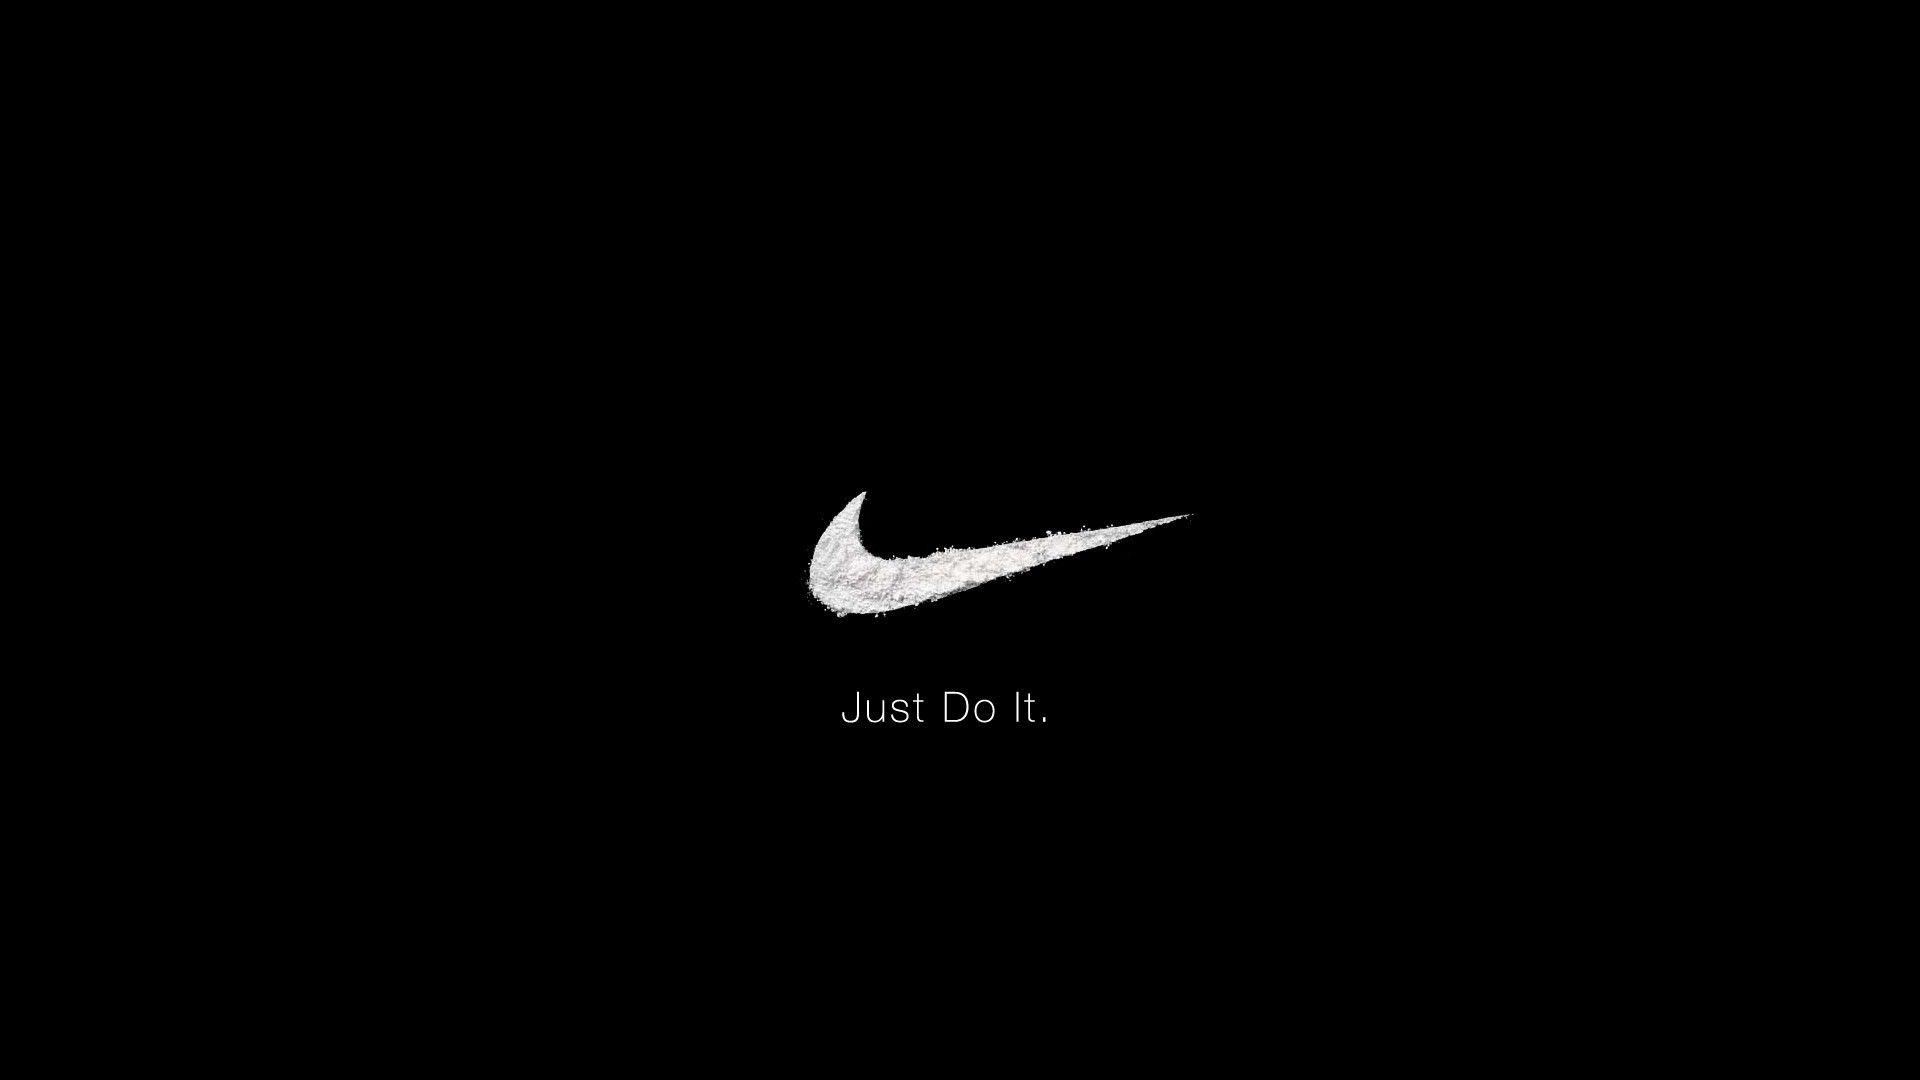 Exciting Black Nike Logo Hd Wallpapers 1920x1080PX ~ Awesome Nike